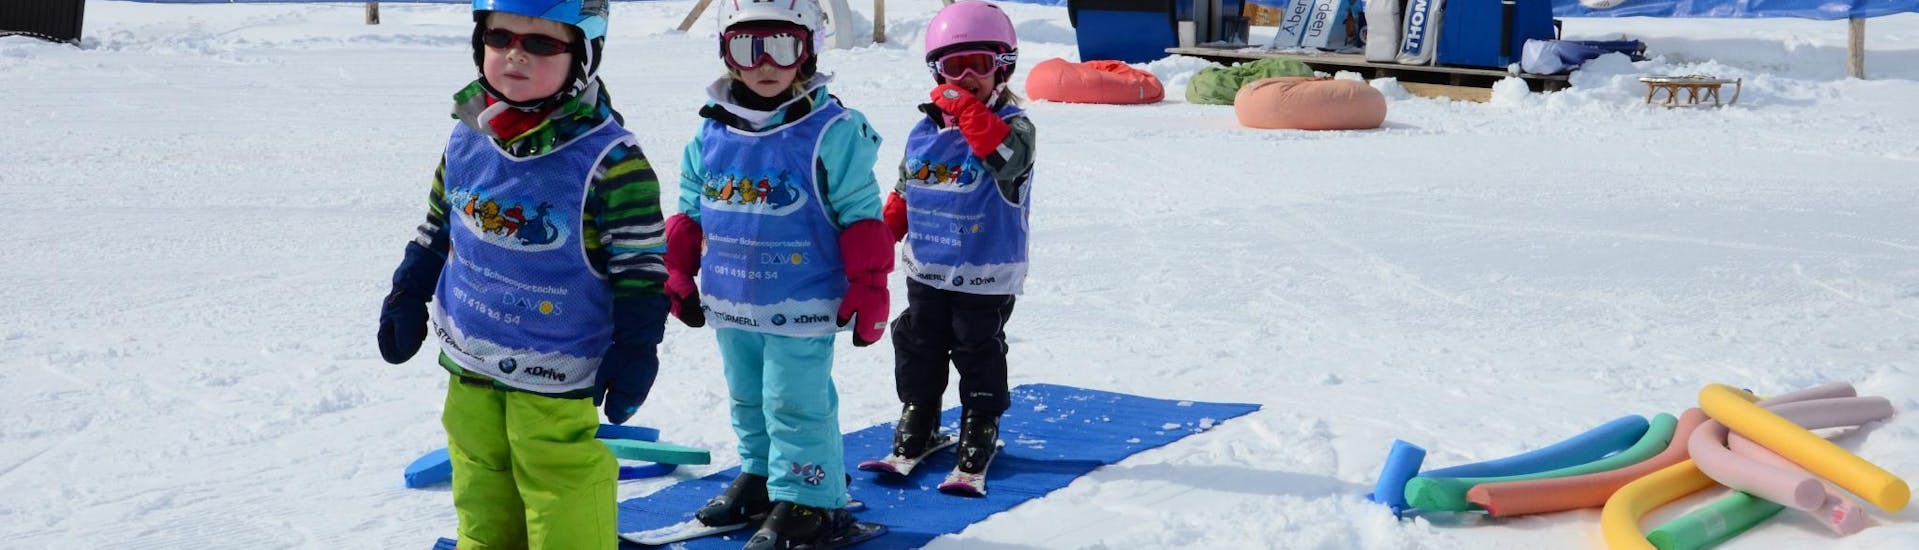 Kids Ski Lessons &quot;Bolgen&quot; (8-14 y.) for Advanced Skiers with Swiss Ski School Davos - Hero image